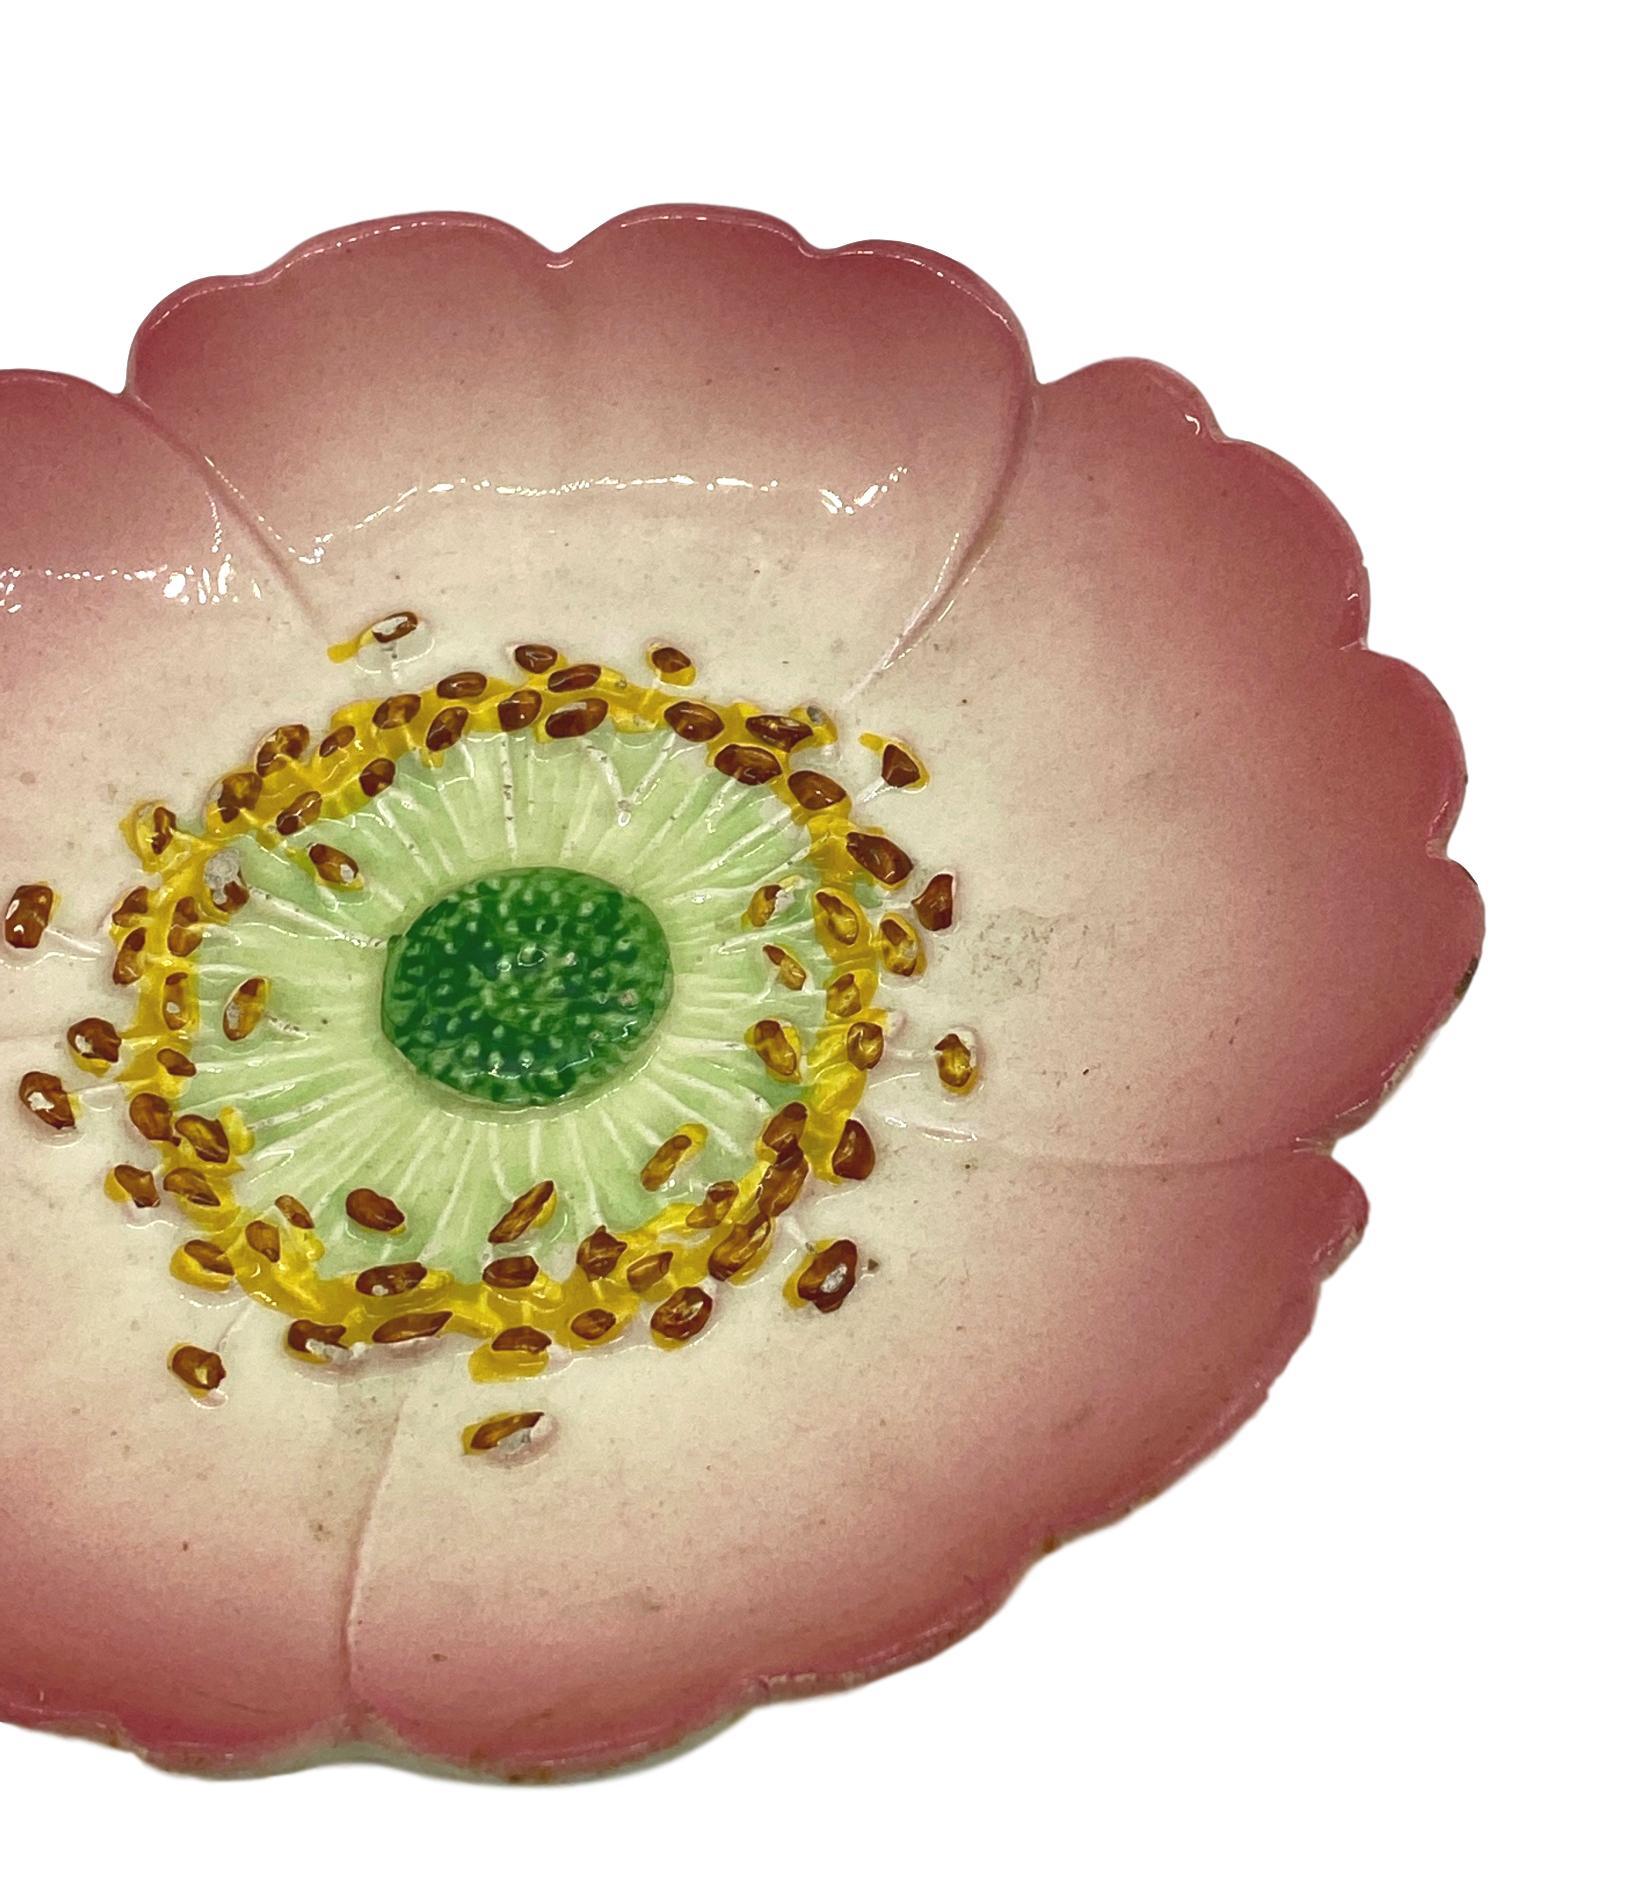 Delphin Massier Majolica (Barbotine) Trompe L'oeil pink flower plate, French, circa 1900, naturalistically molded as a rosehip flower, signed on reverse: 'Delphin Massier Vallauris A.M.' 
Measurements: Diameter 7.75 x Height 1.25.
For over 28